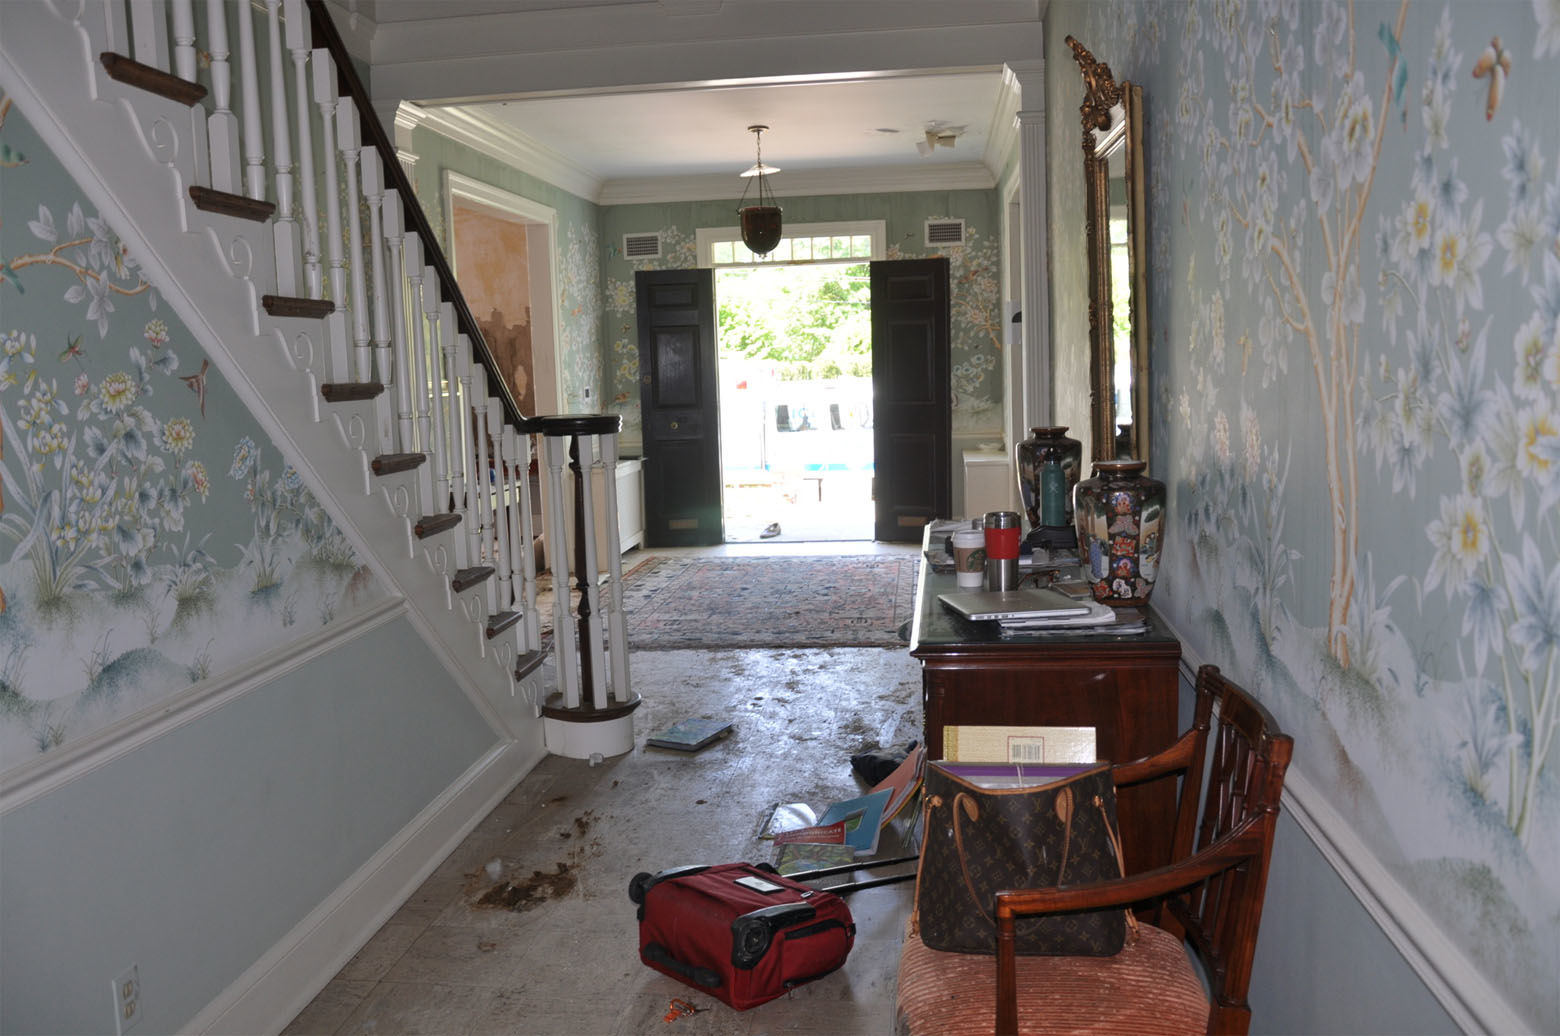 The entryway to the Savopoulos house. (Courtesy U.S. Attorney's Office for D.C.)